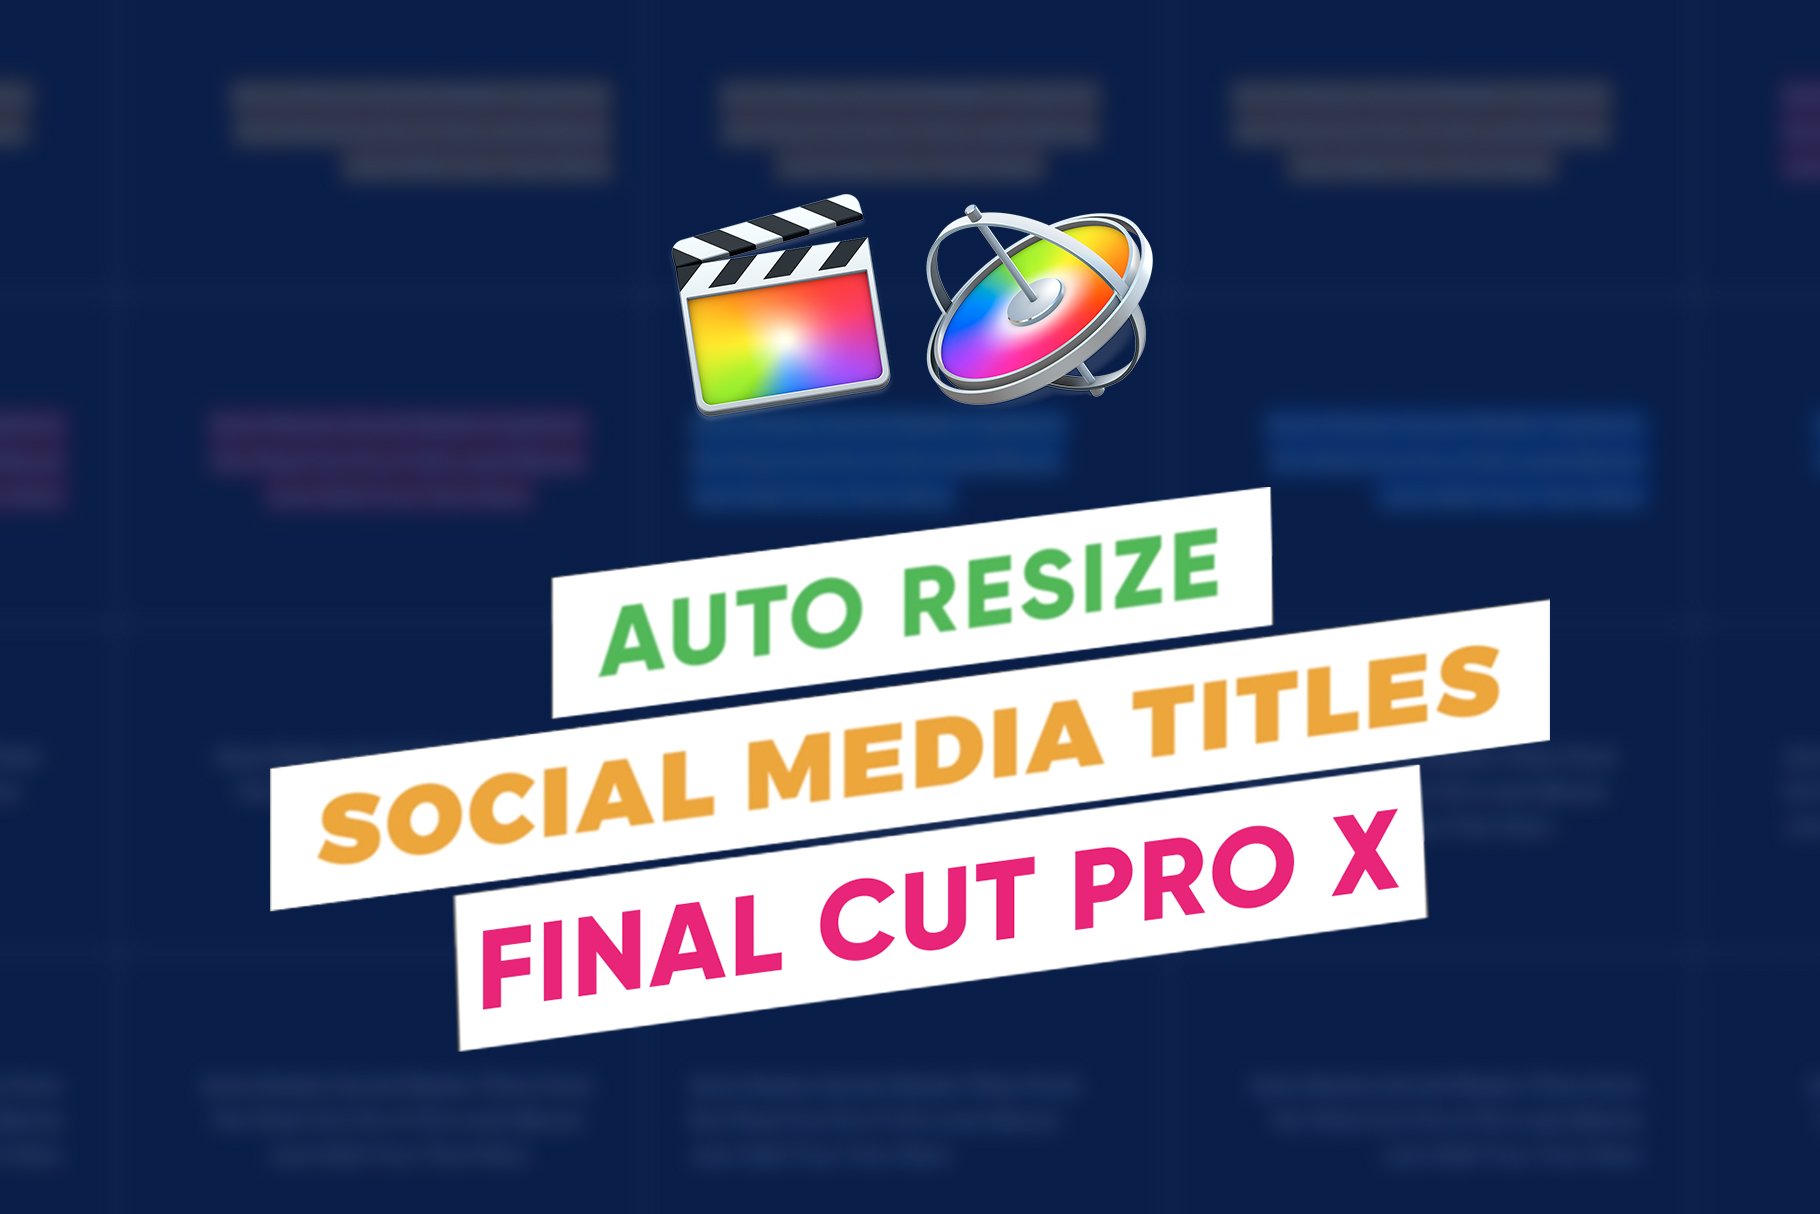 AutoResize Social Media Titles FCPX cover image.